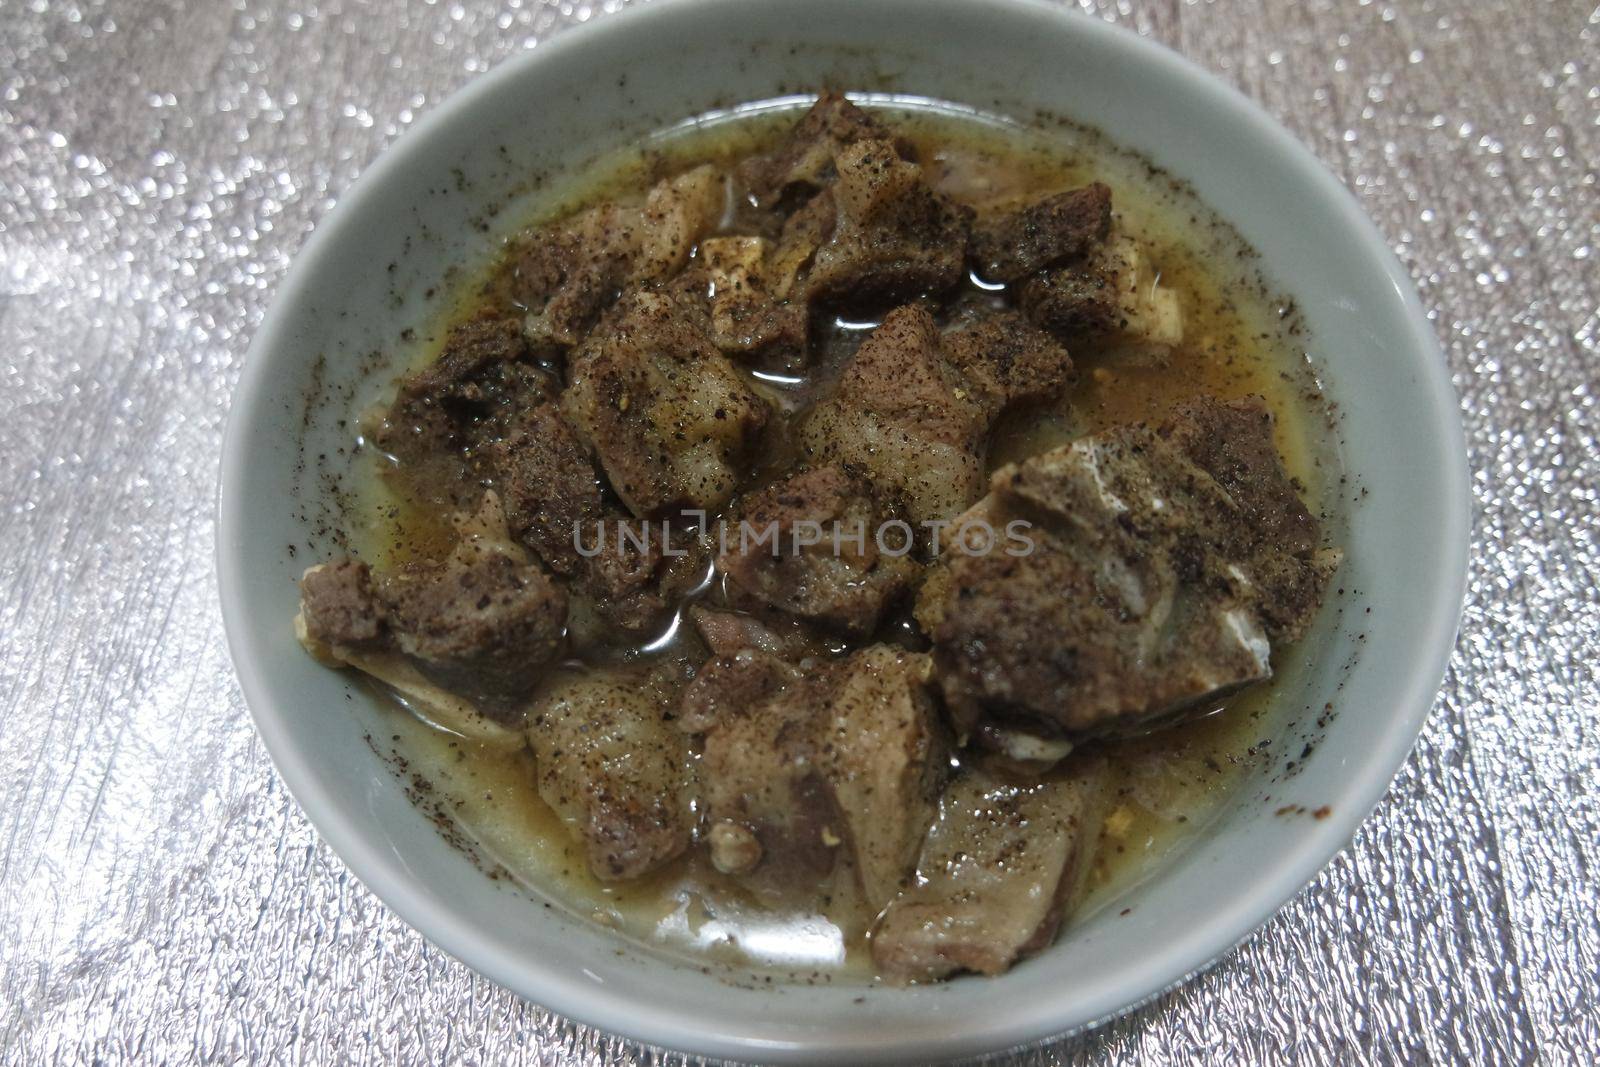 Top view of siri paaye or paya dish garnished with diced ginger, long coriander and black pepper. This dish is popular in Pakistan and Bangladesh